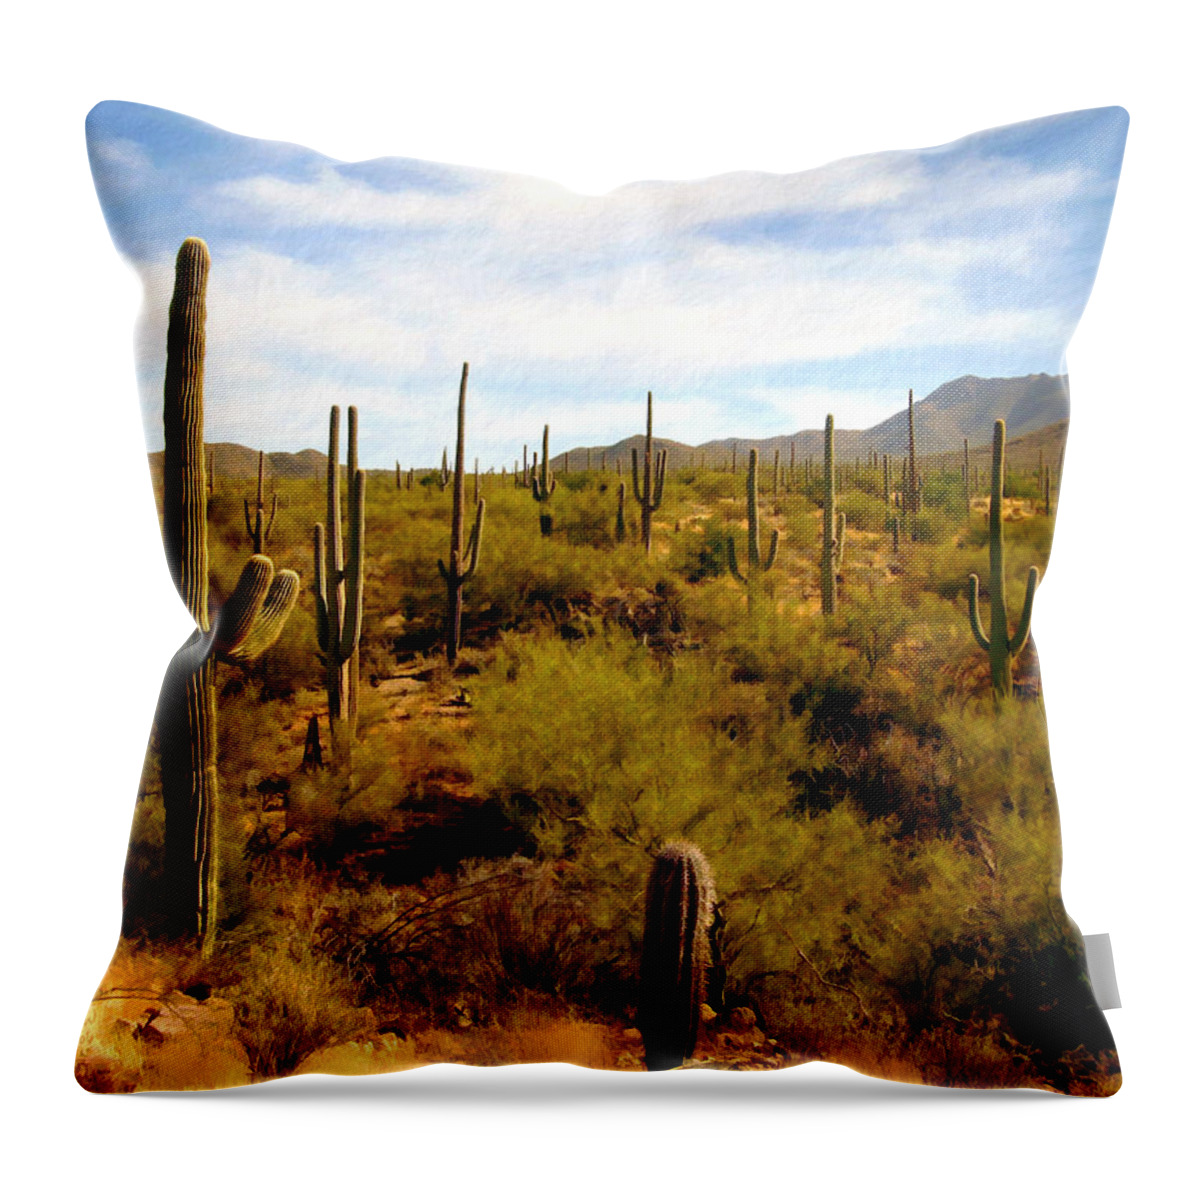 Suguaro Cactus Throw Pillow featuring the photograph Suguro National Park by Kurt Van Wagner